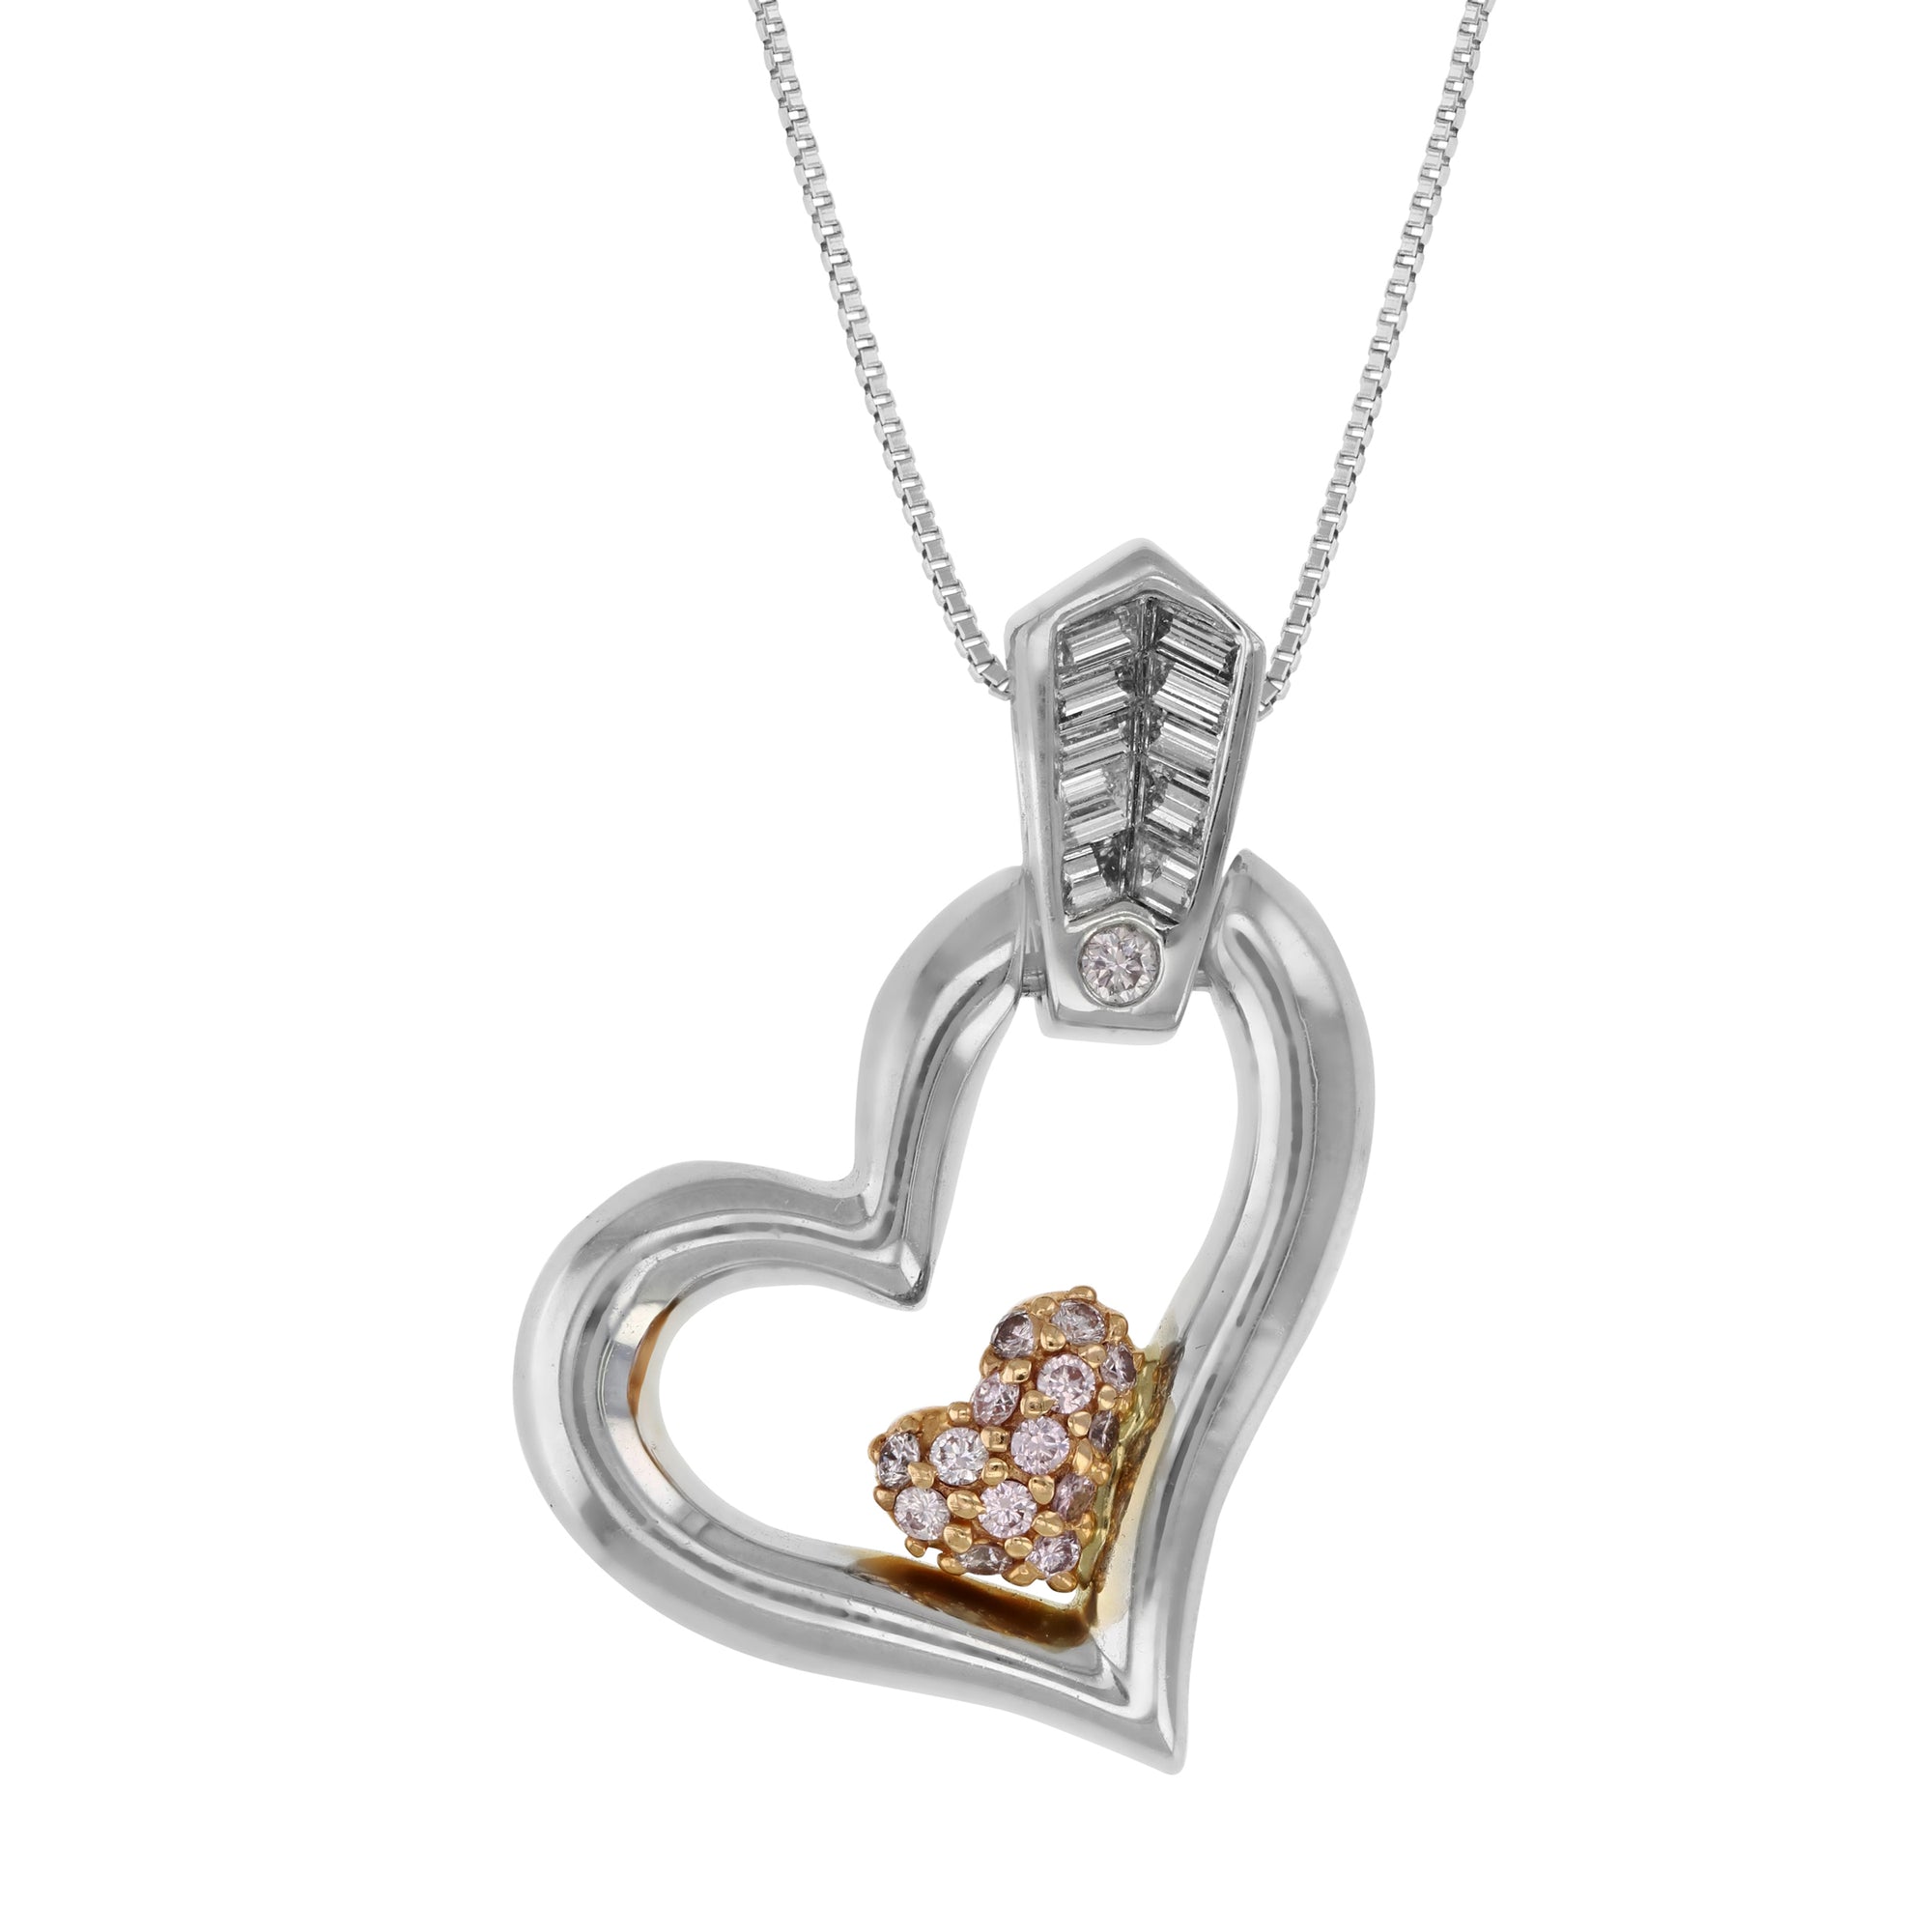 0.15 cttw Diamond Heart Pendant In 14K White and Pink Gold with 18 Inch Chain